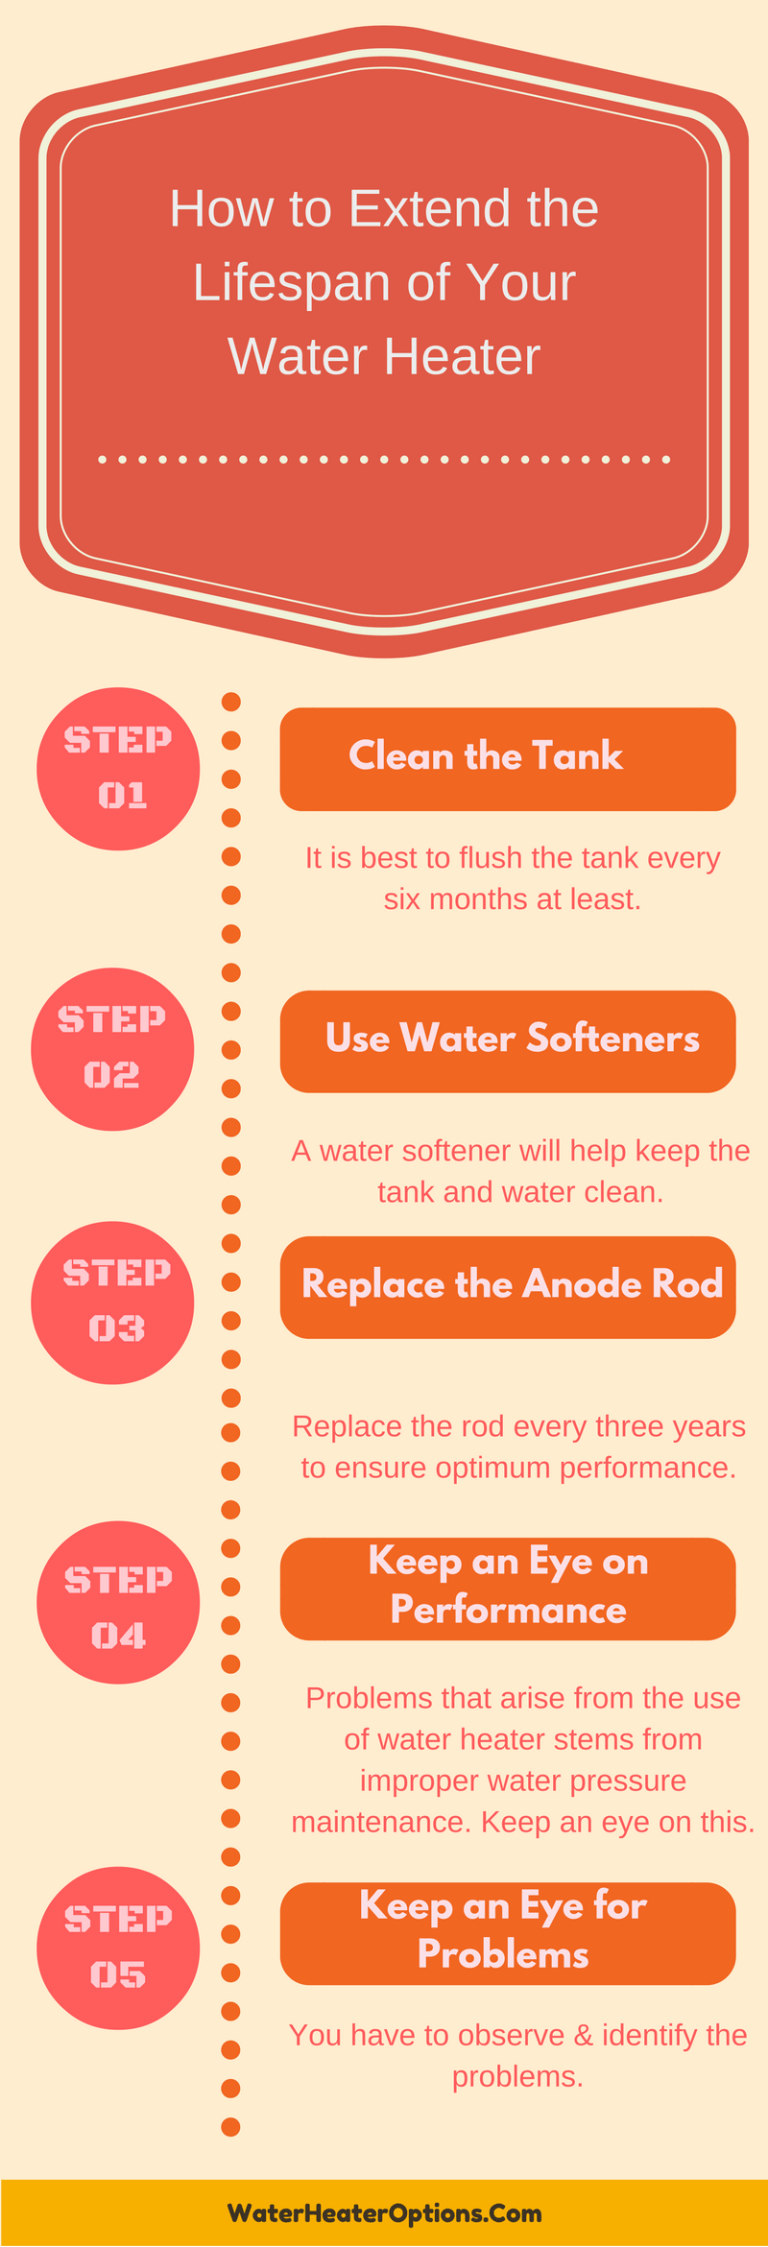 Extend the Lifespan of Your Water Heater